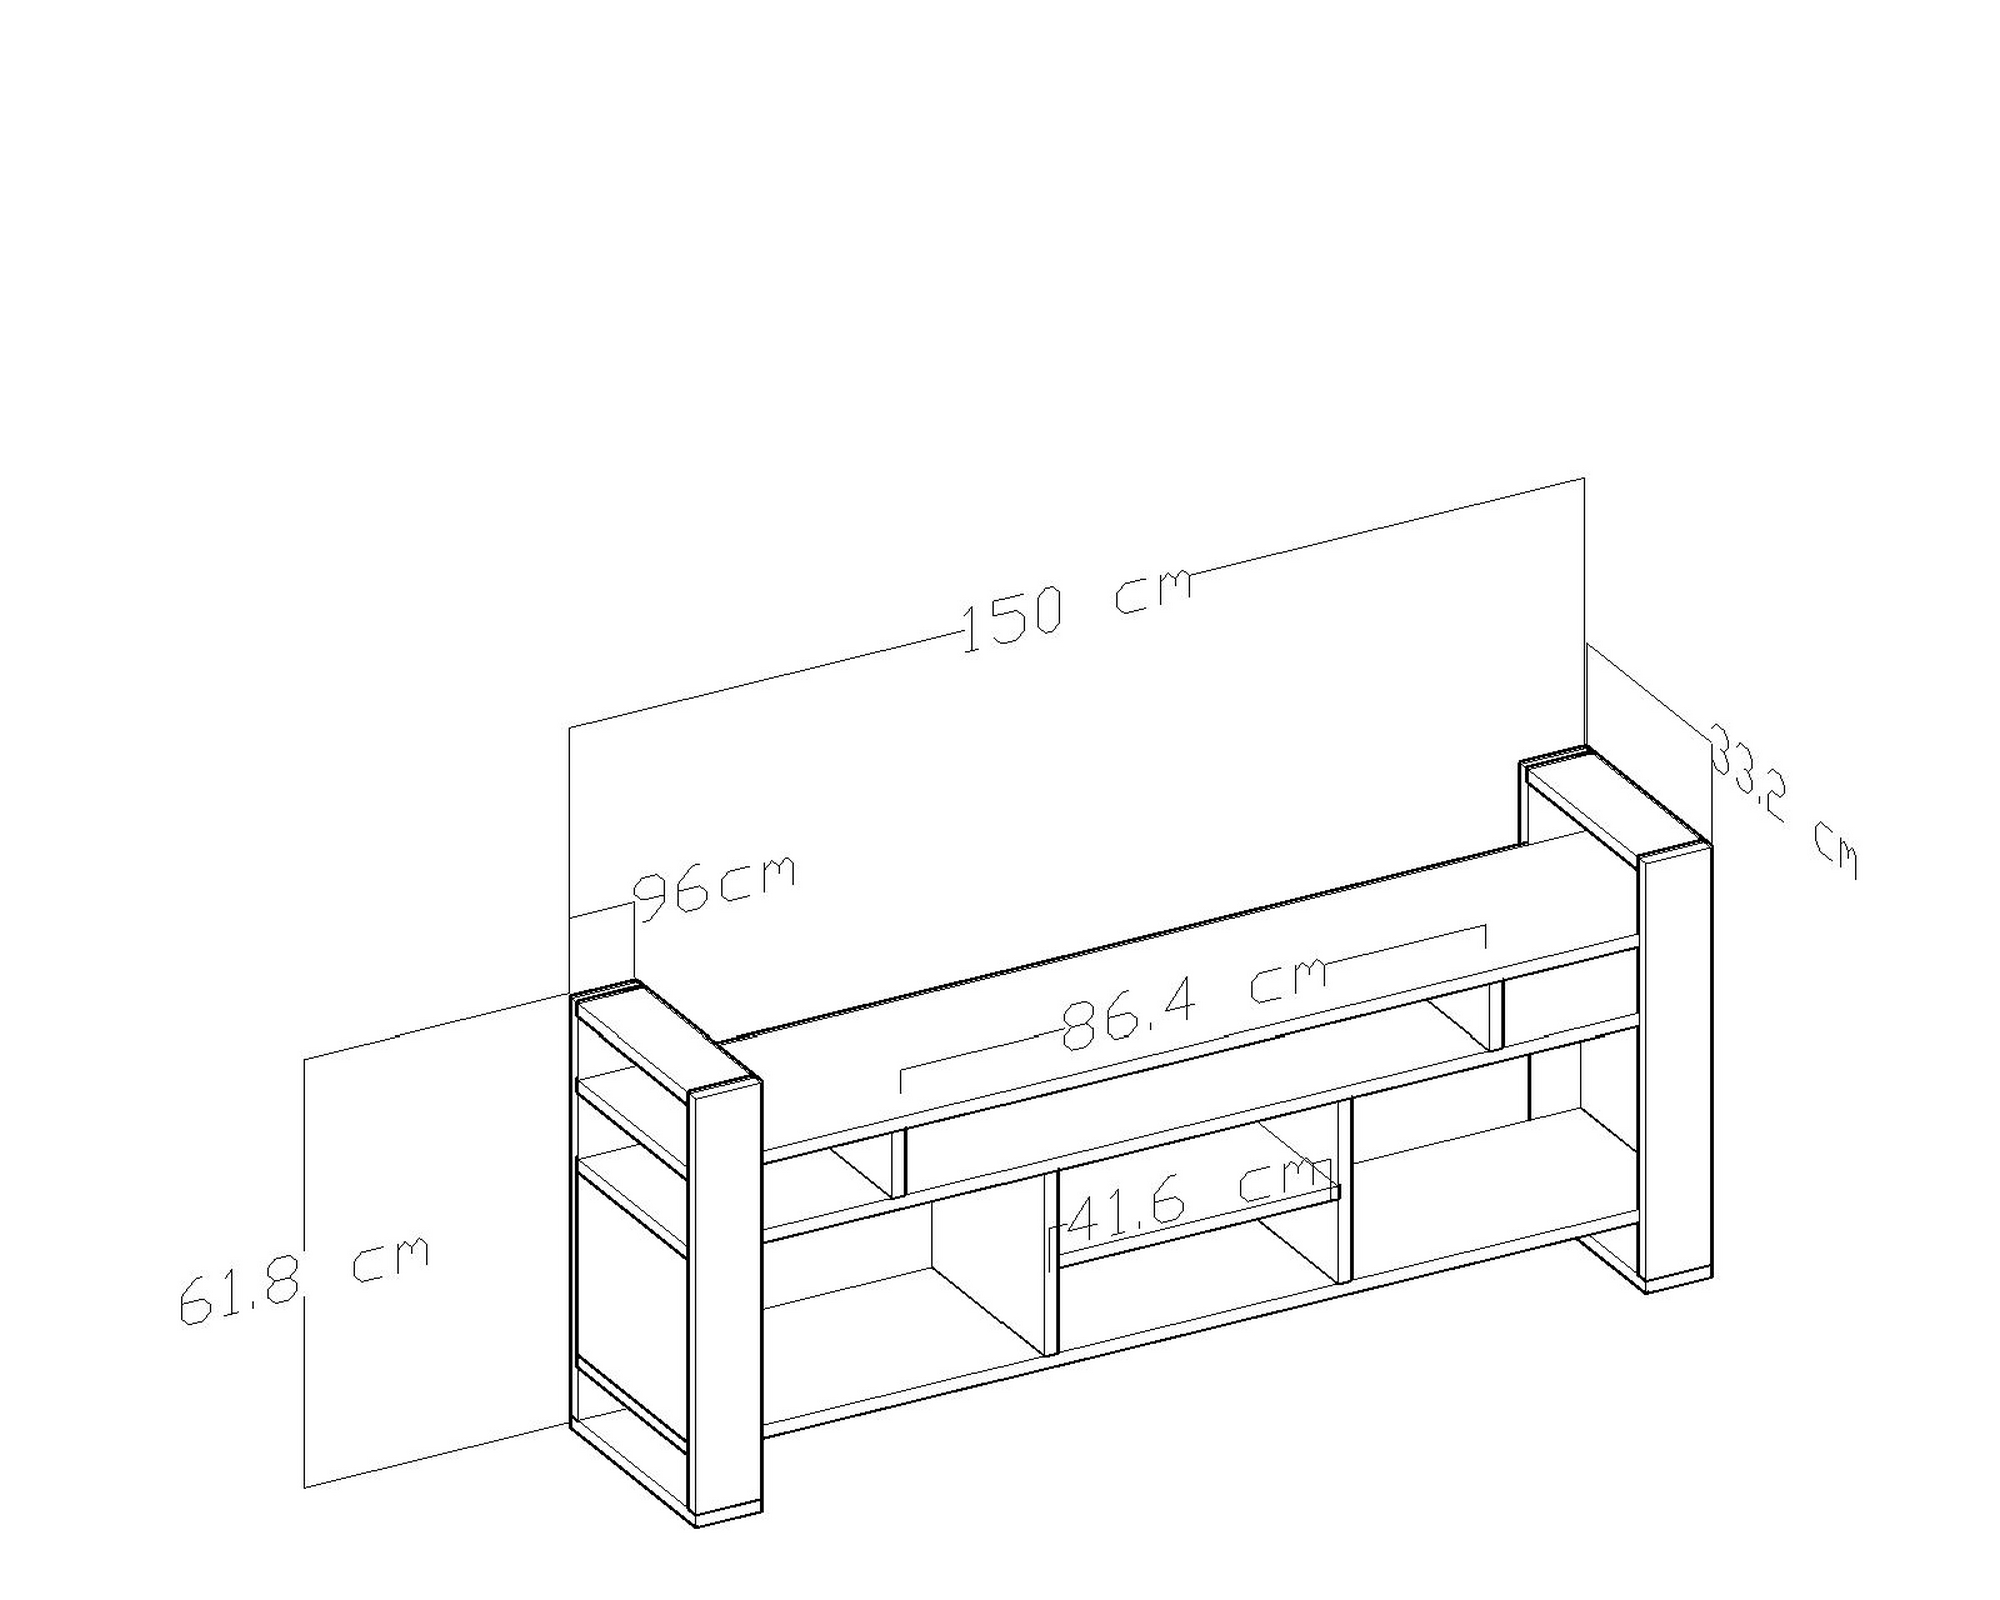 TV stand 